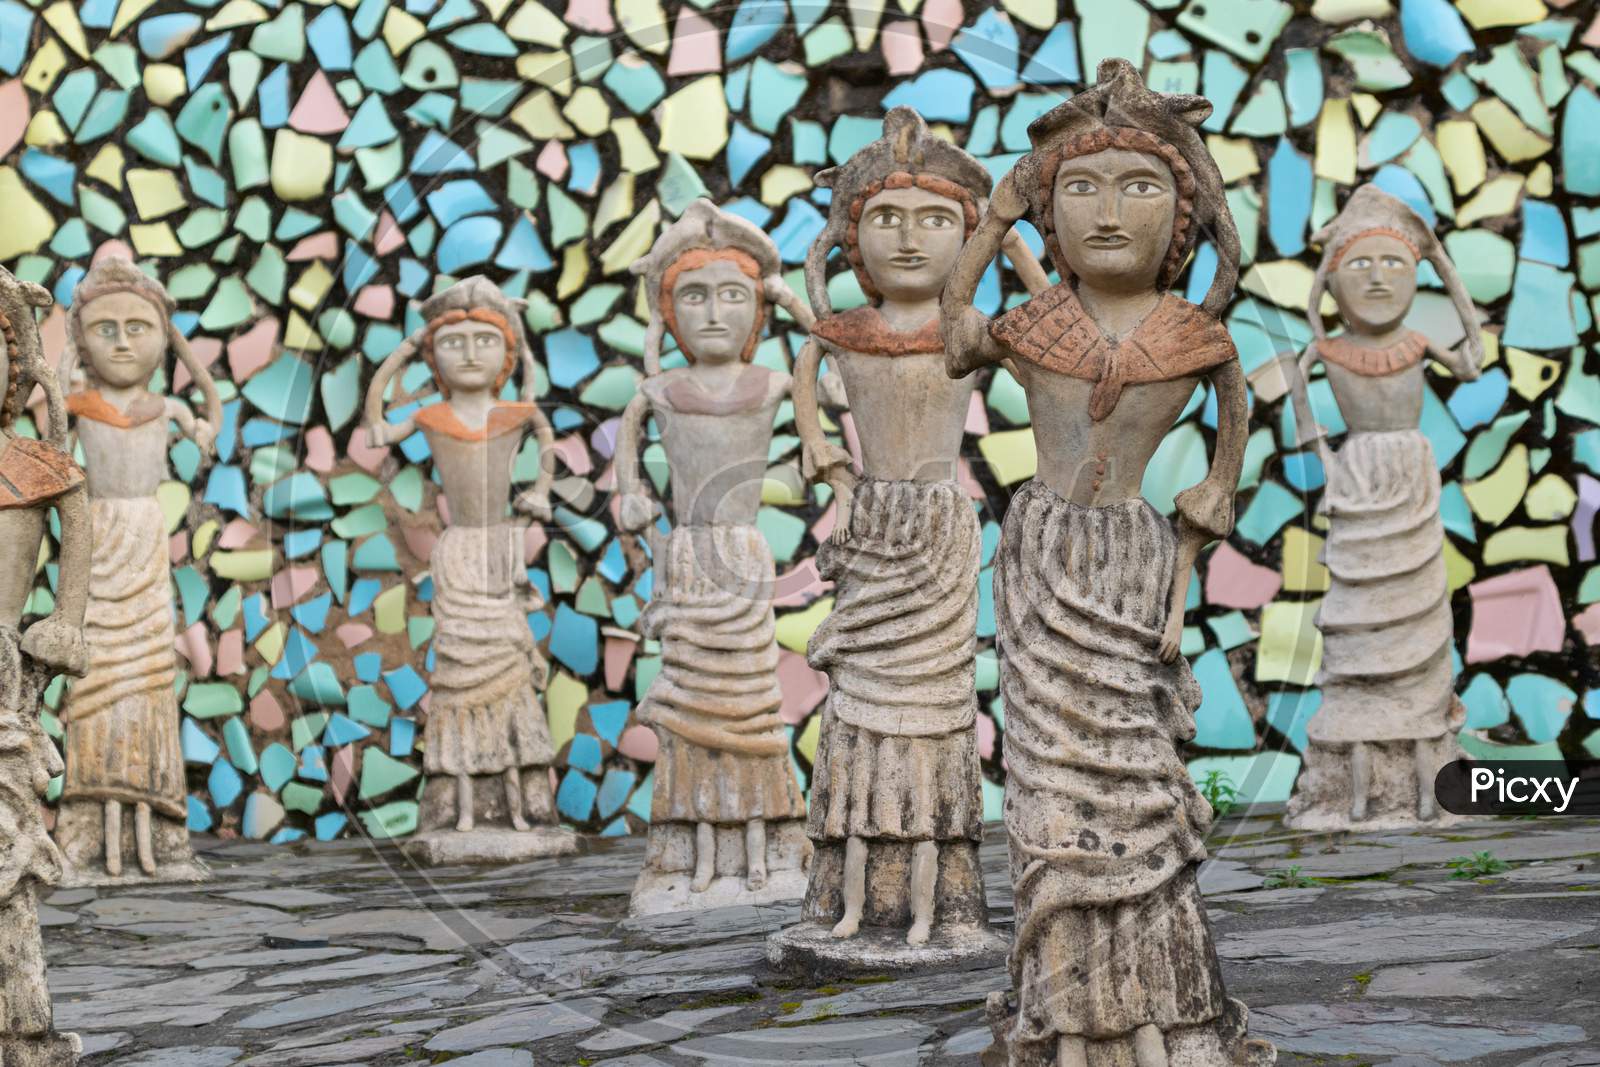 sculptures and decorated wall with broken tiles at rock garden chandigarh